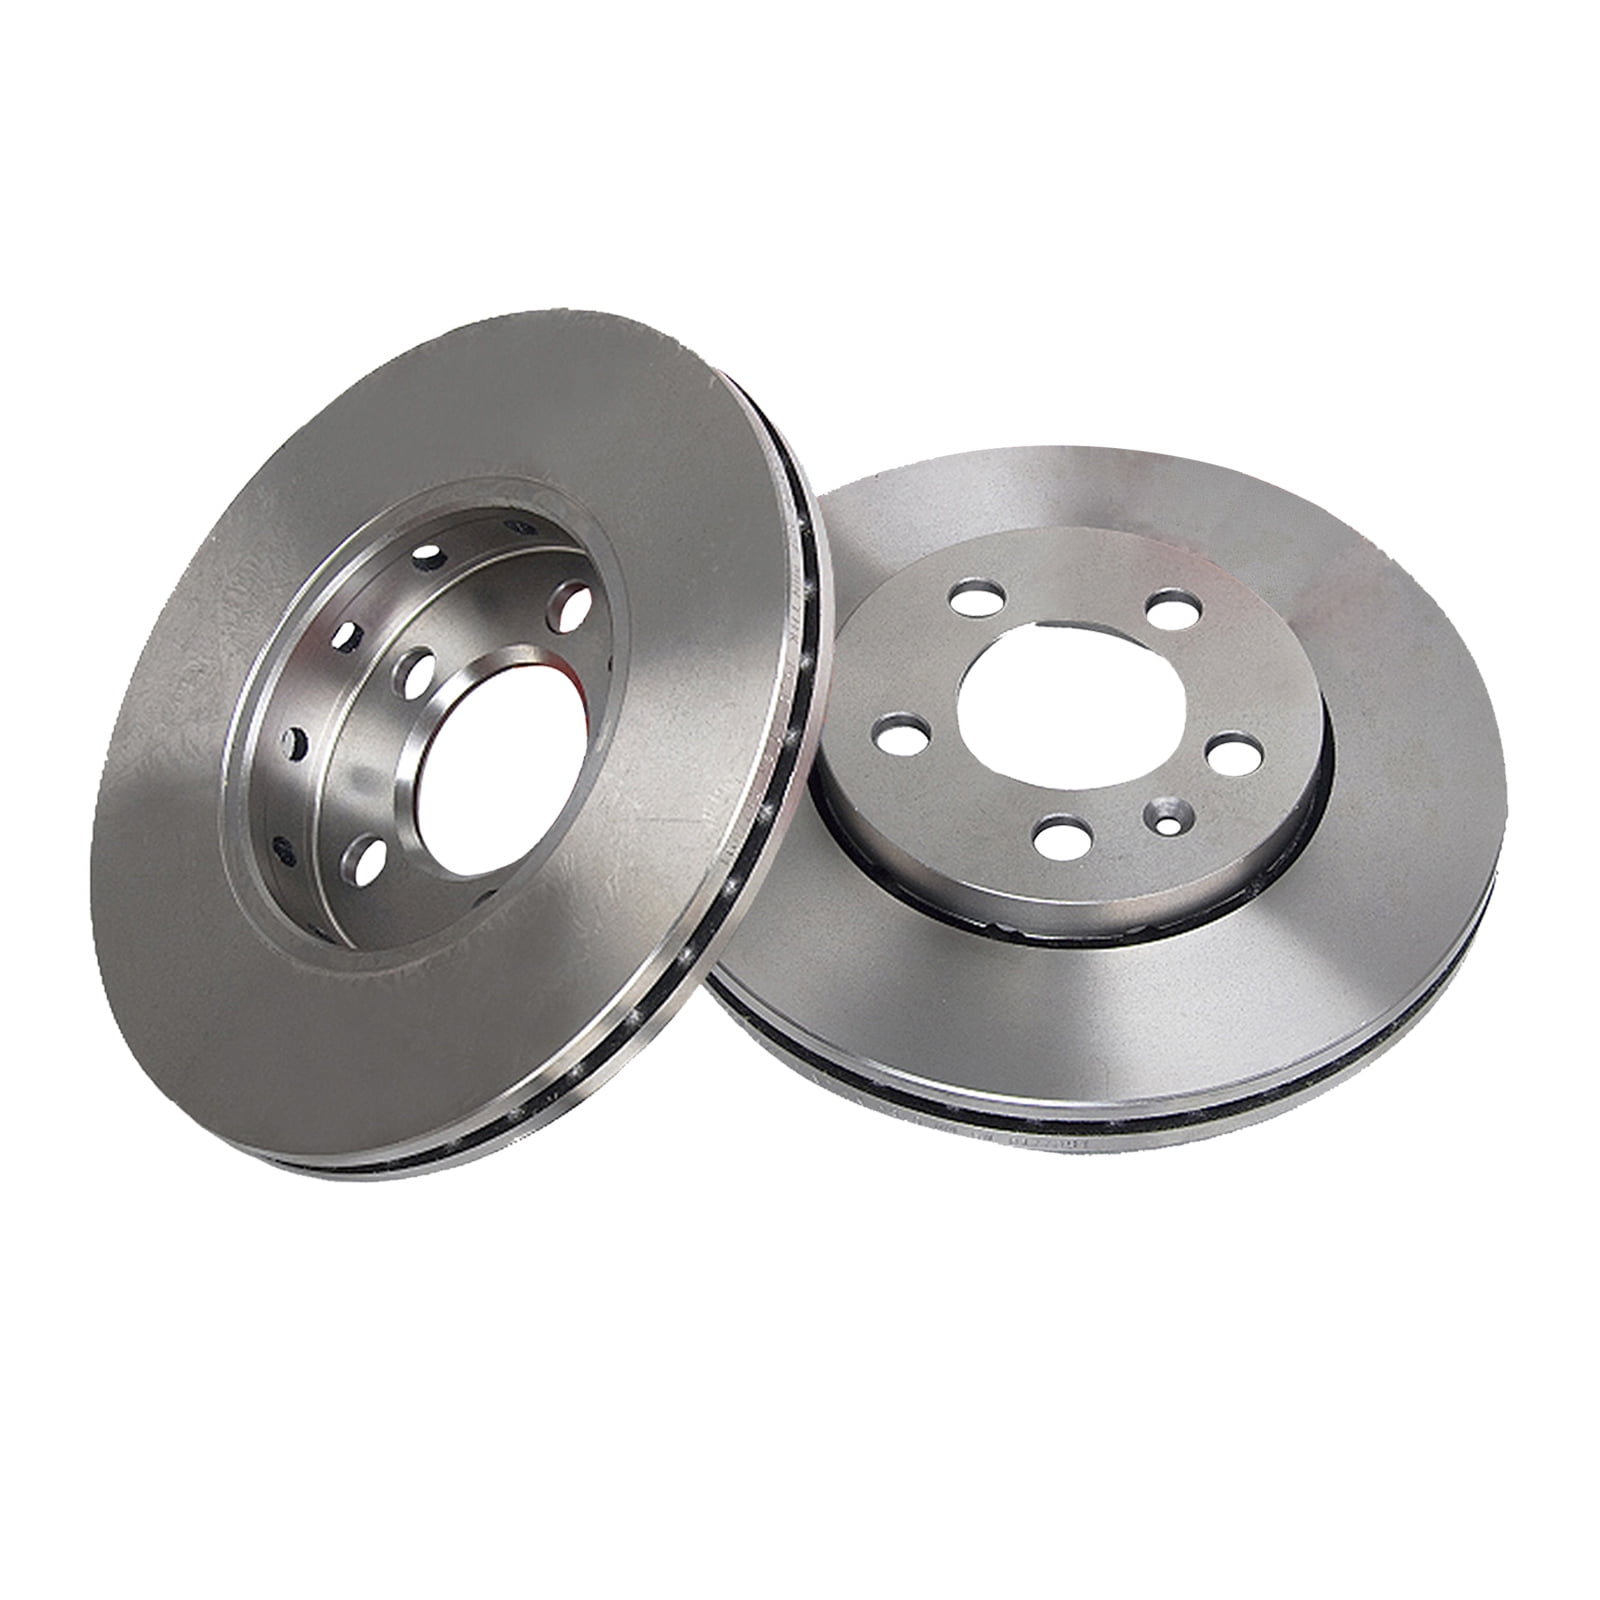 For Chevy Pontiac Cobalt Lt Front 280 mm Brake Disc Rotors And Ceramic Pads